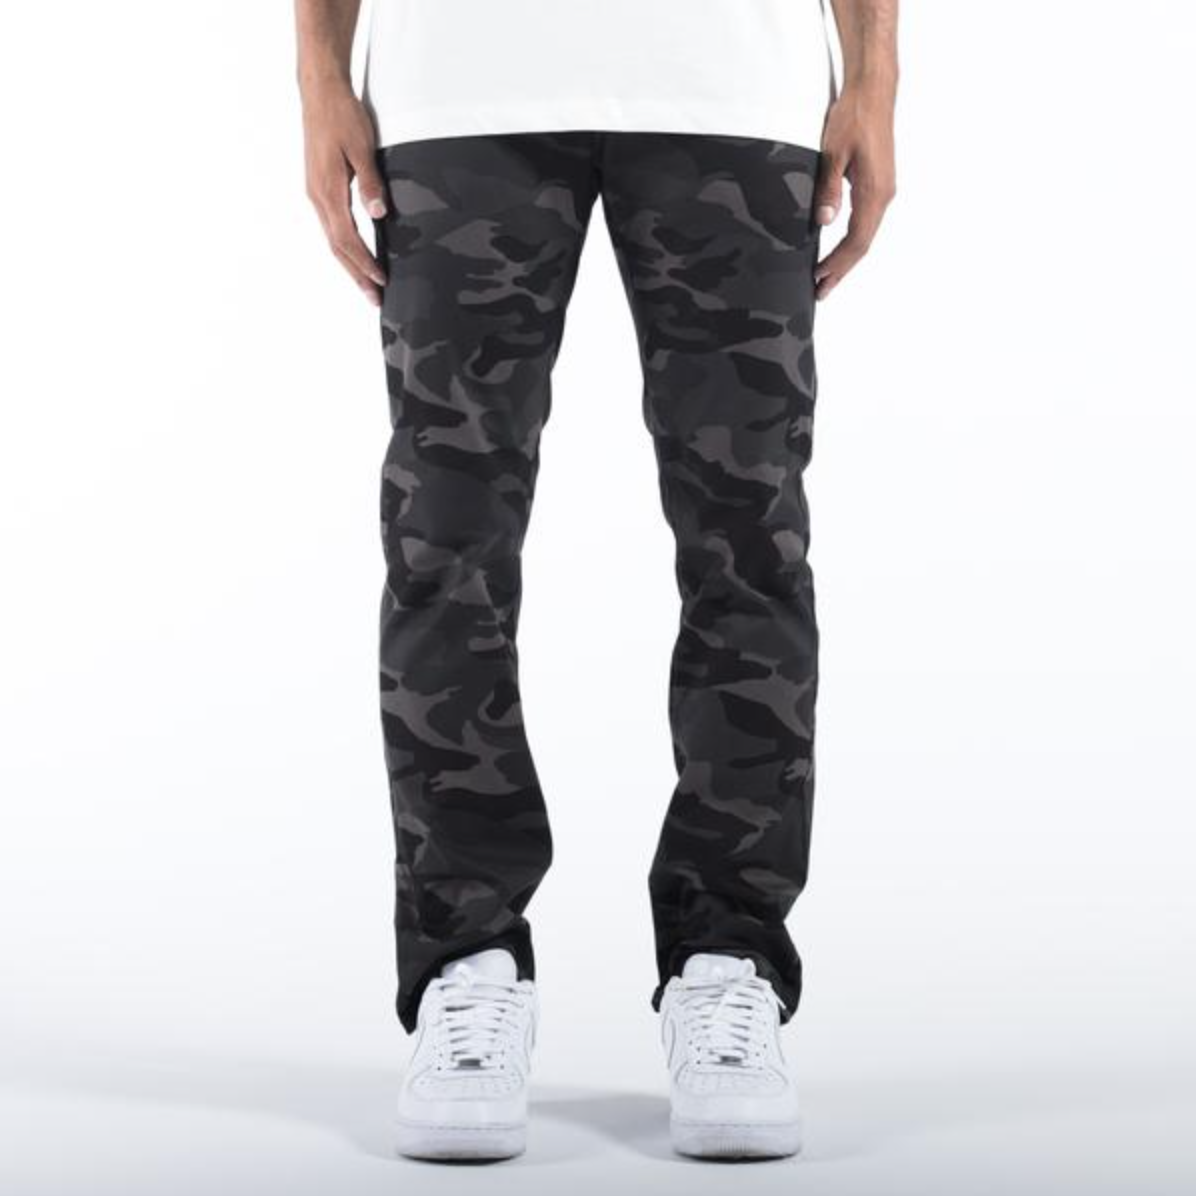 BLKWD The Linden - Woodland Camo Jeans